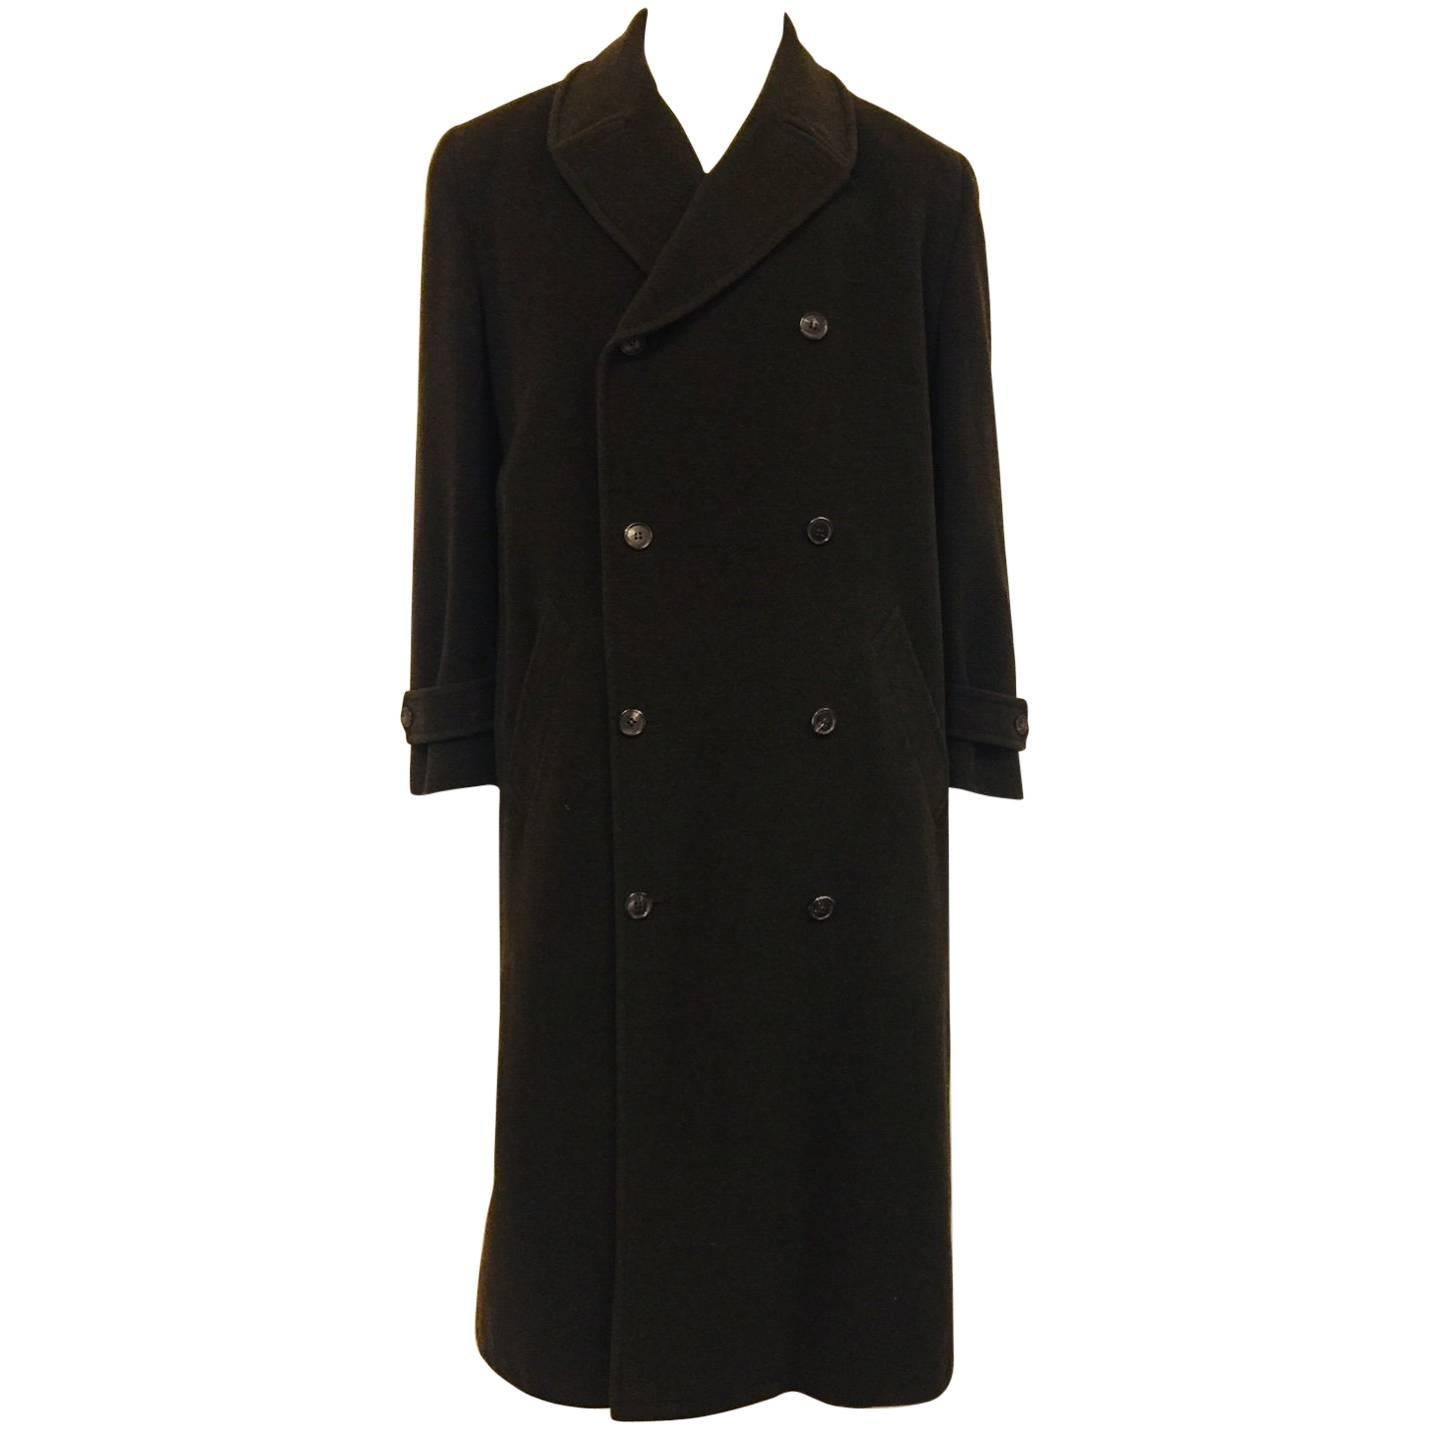 Men's Handsome Hermes Cashmere Coat, Double Breasted, Forest Green, Large